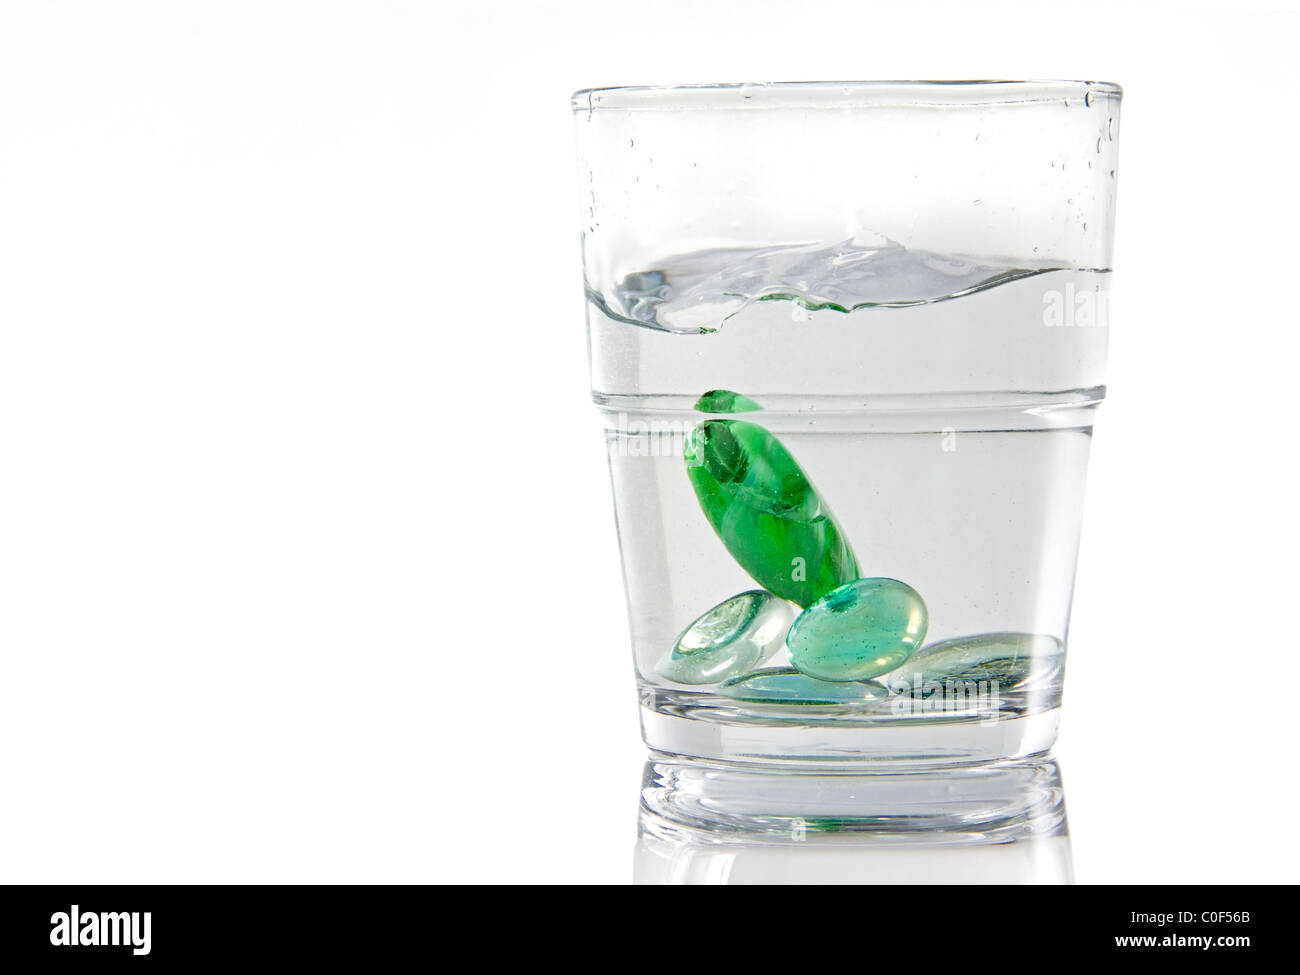 Marbles being dropped in a glass of water. White background isolated image Stock Photo